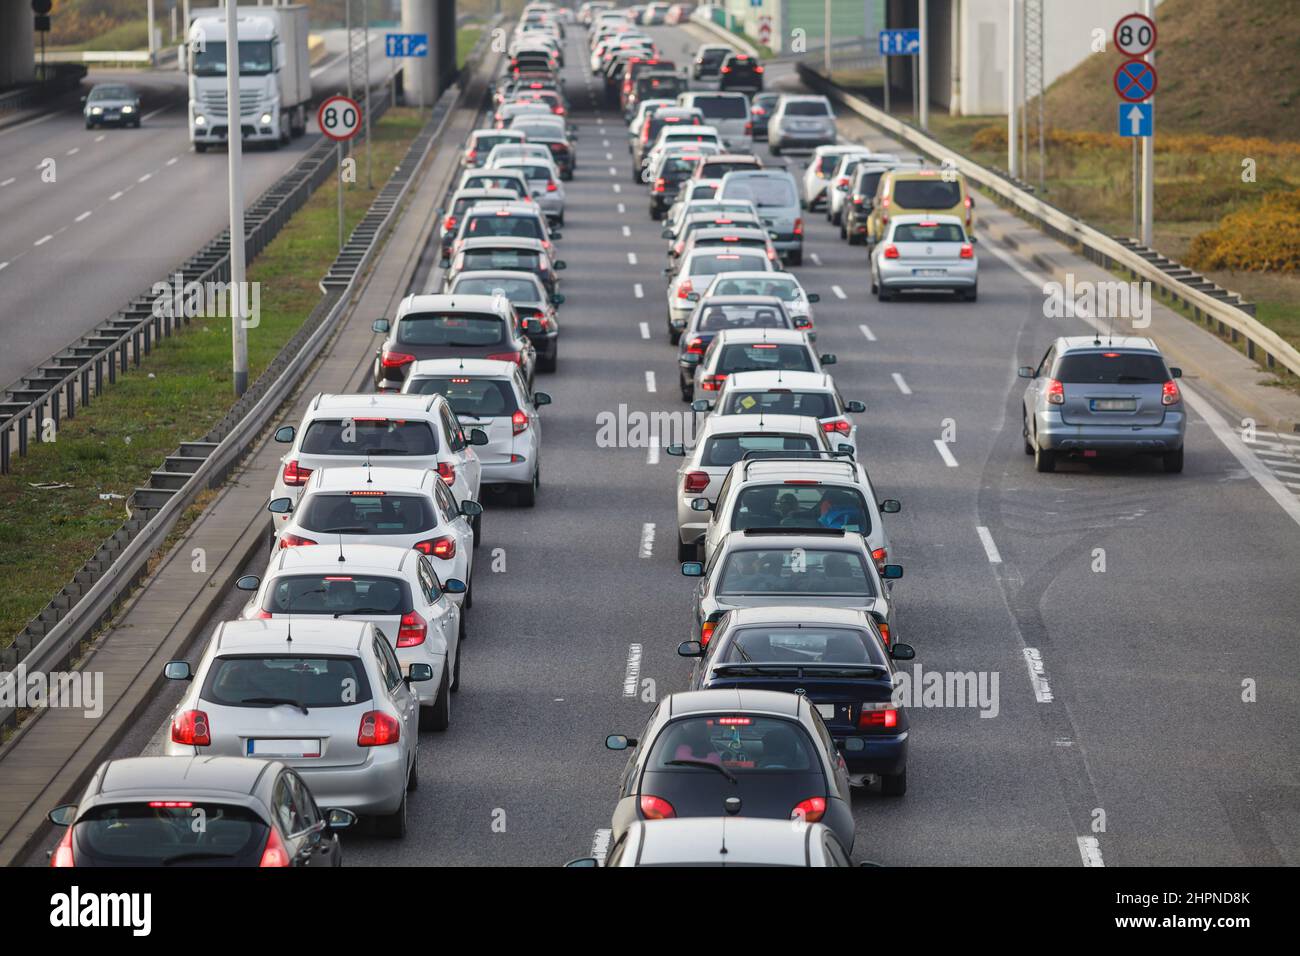 Traffic jam on an express road, several cars waiting in the queue Stock Photo